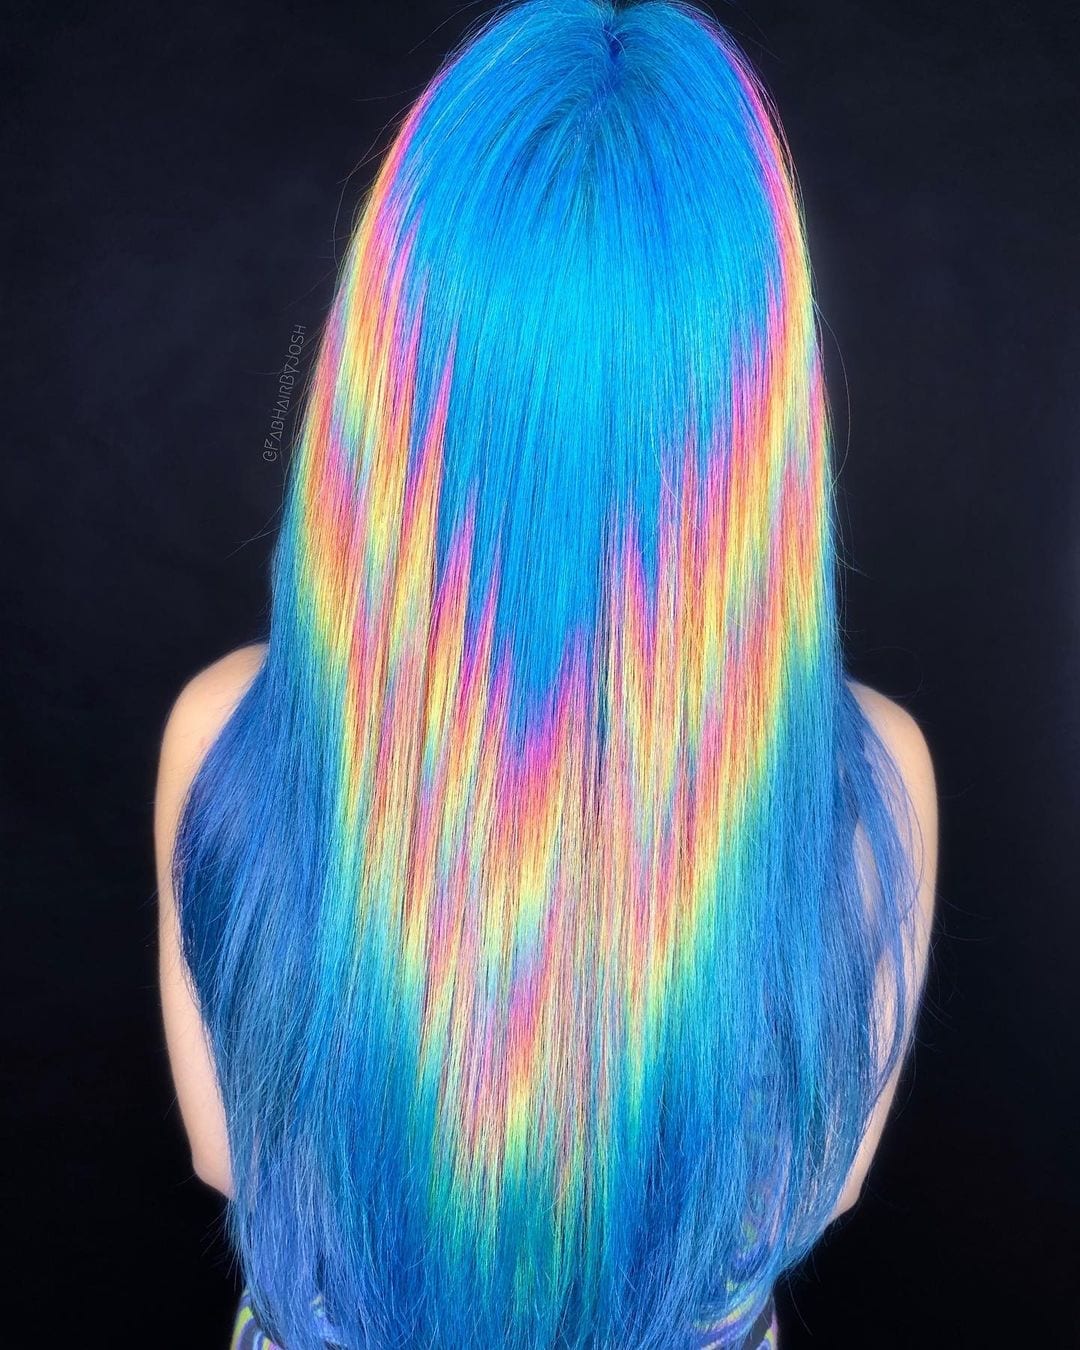 Halographic hairstyle that takes inspiration from a summer storm with shades of blue and yellow